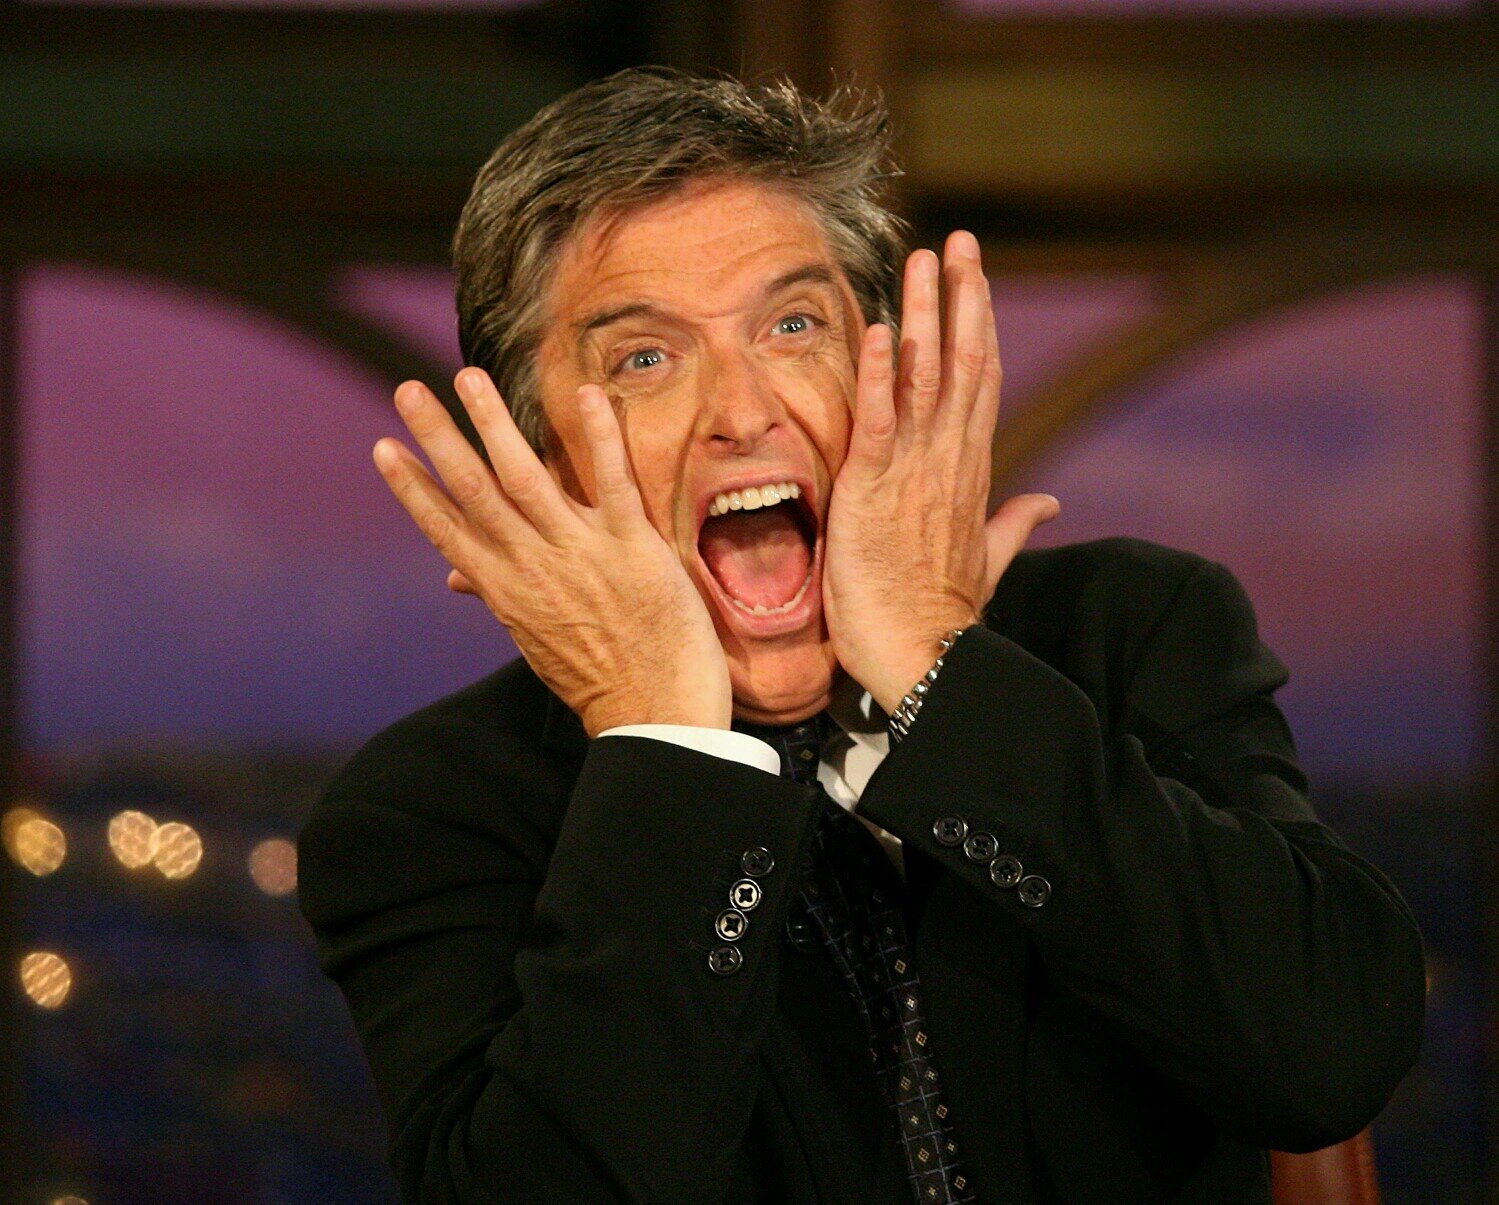 Trying to make an honest man out of Craig Ferguson. That's all.